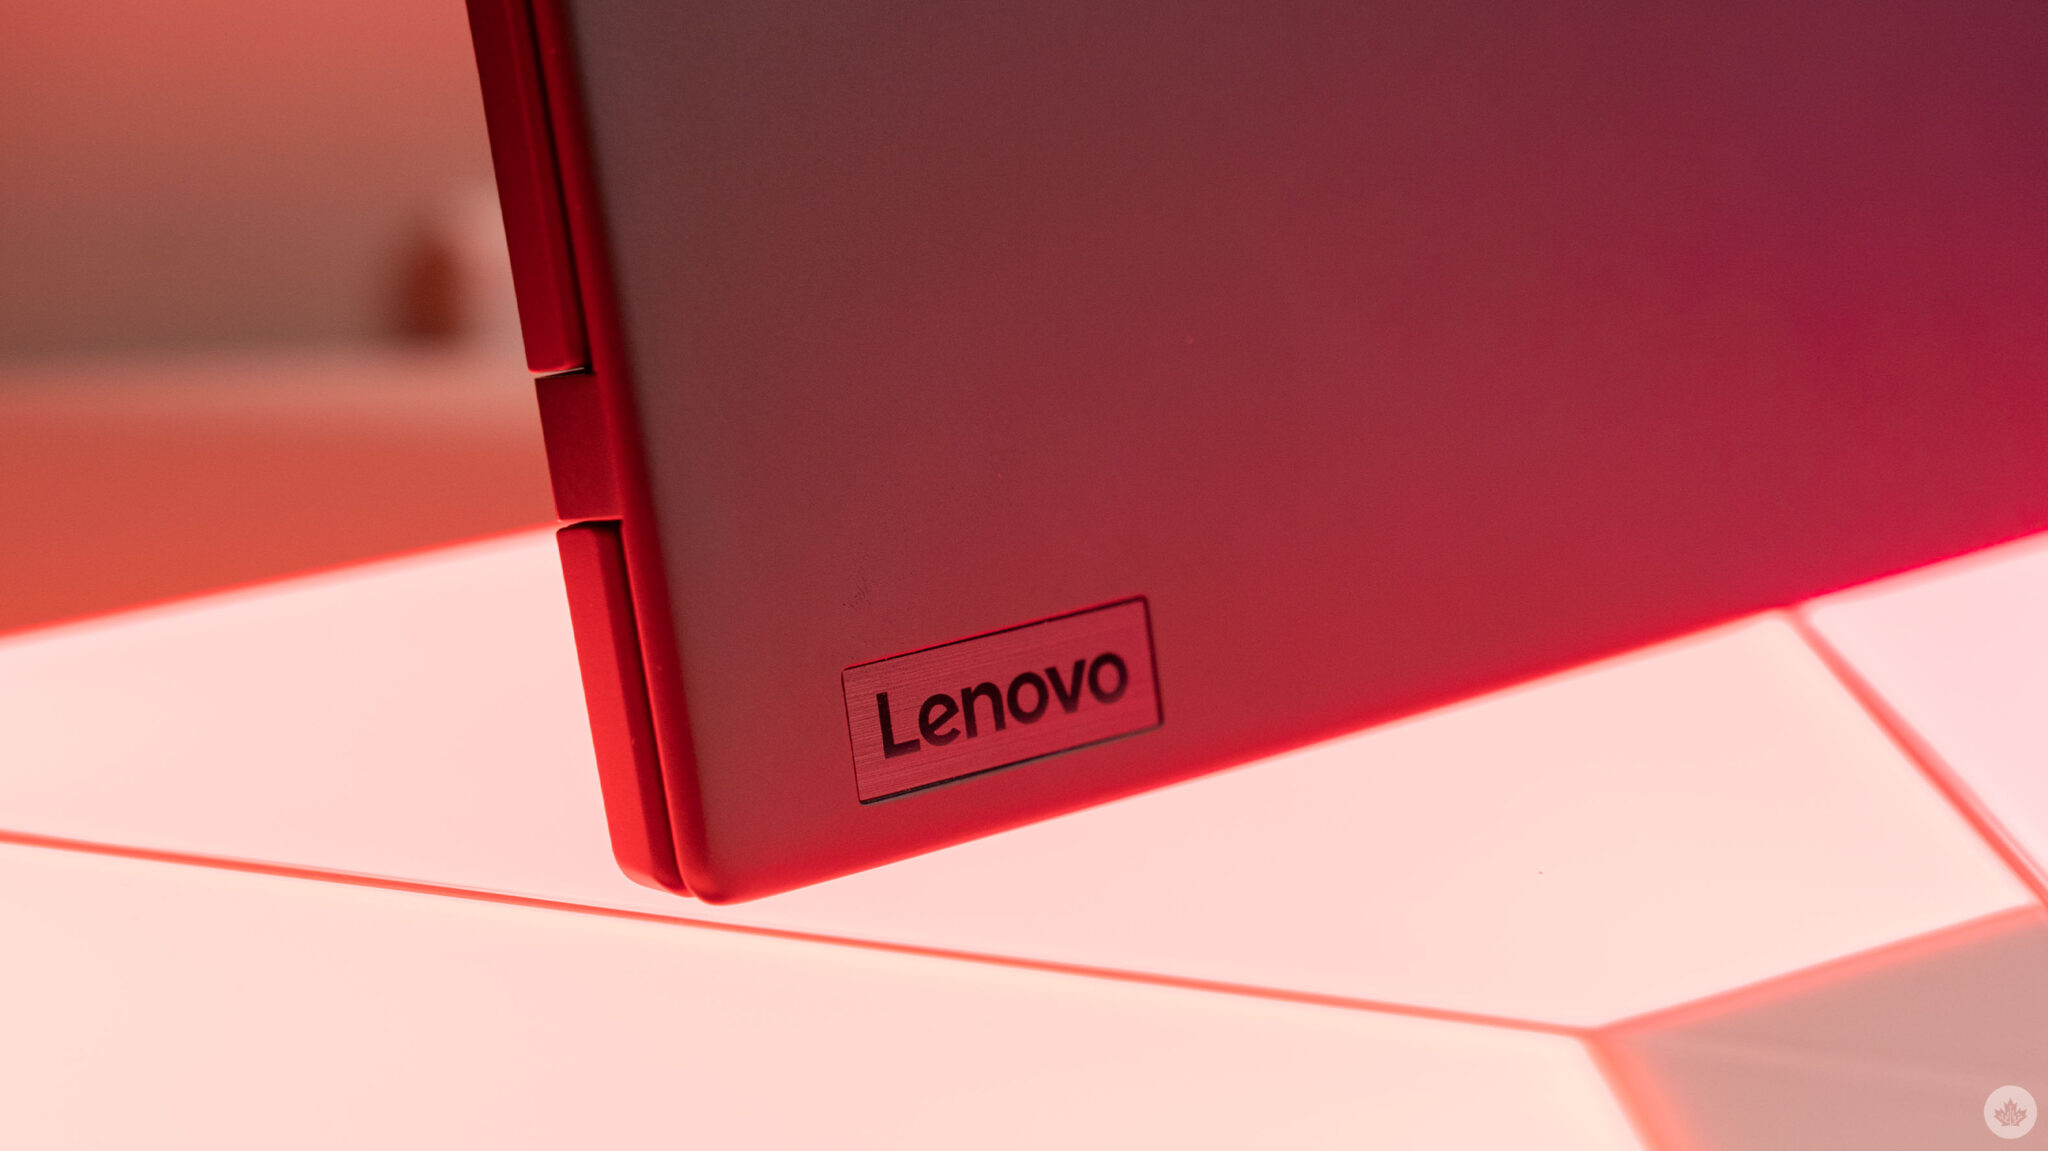 Lenovo Boxing Week deals include big savings on laptops